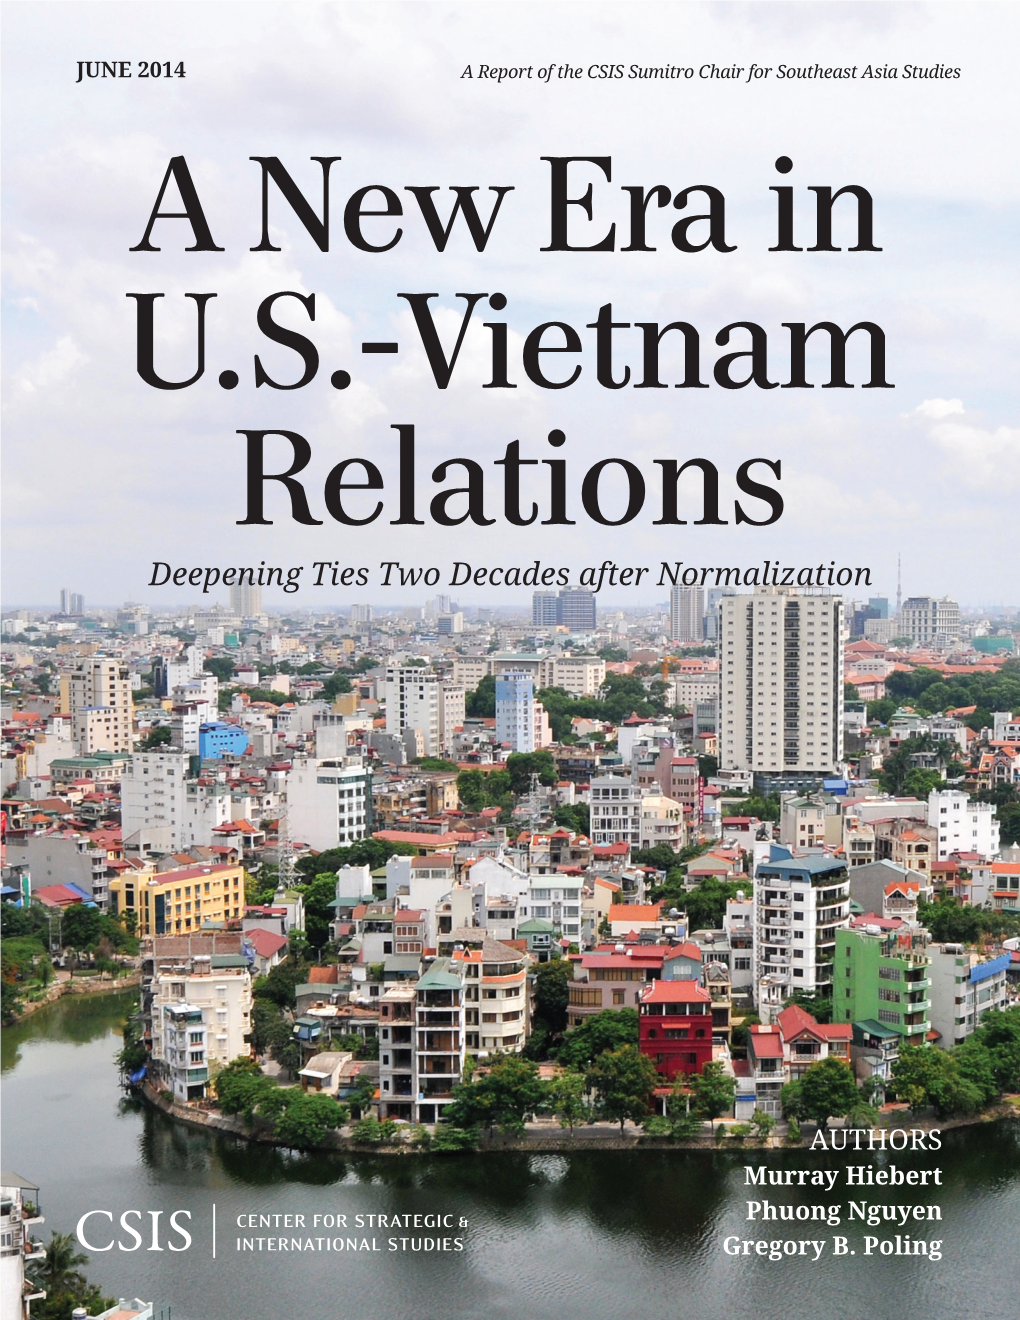 A New Era in U.S.-Vietnam Relations: Deepening Ties Two Decades After